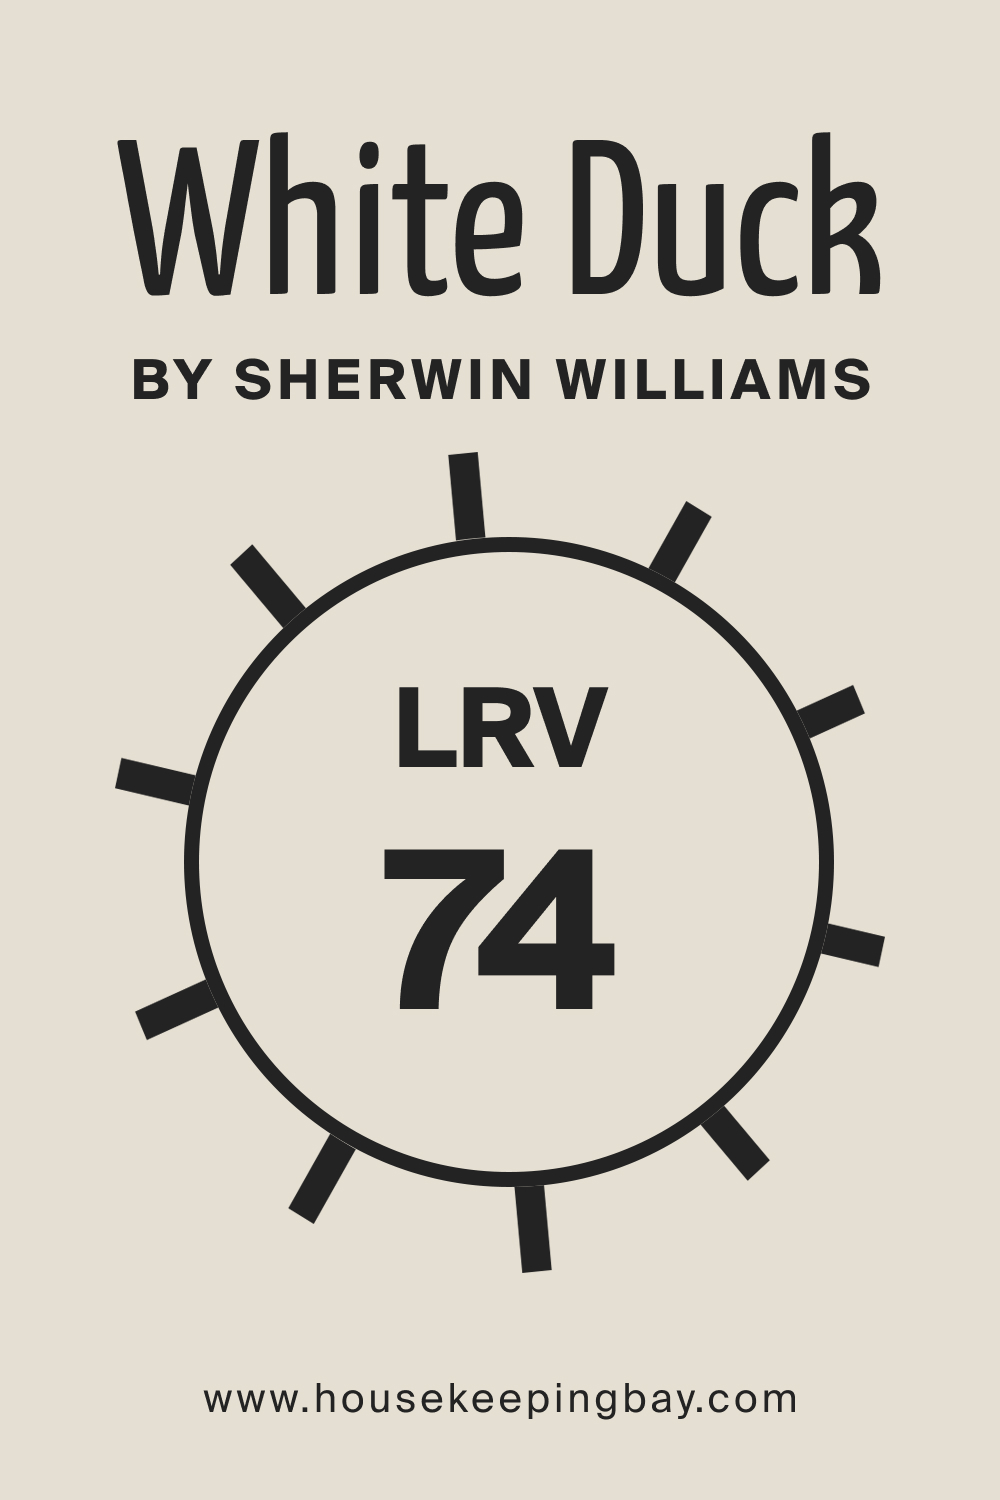 SW White Duck by Sherwin Williams. LRV – 74